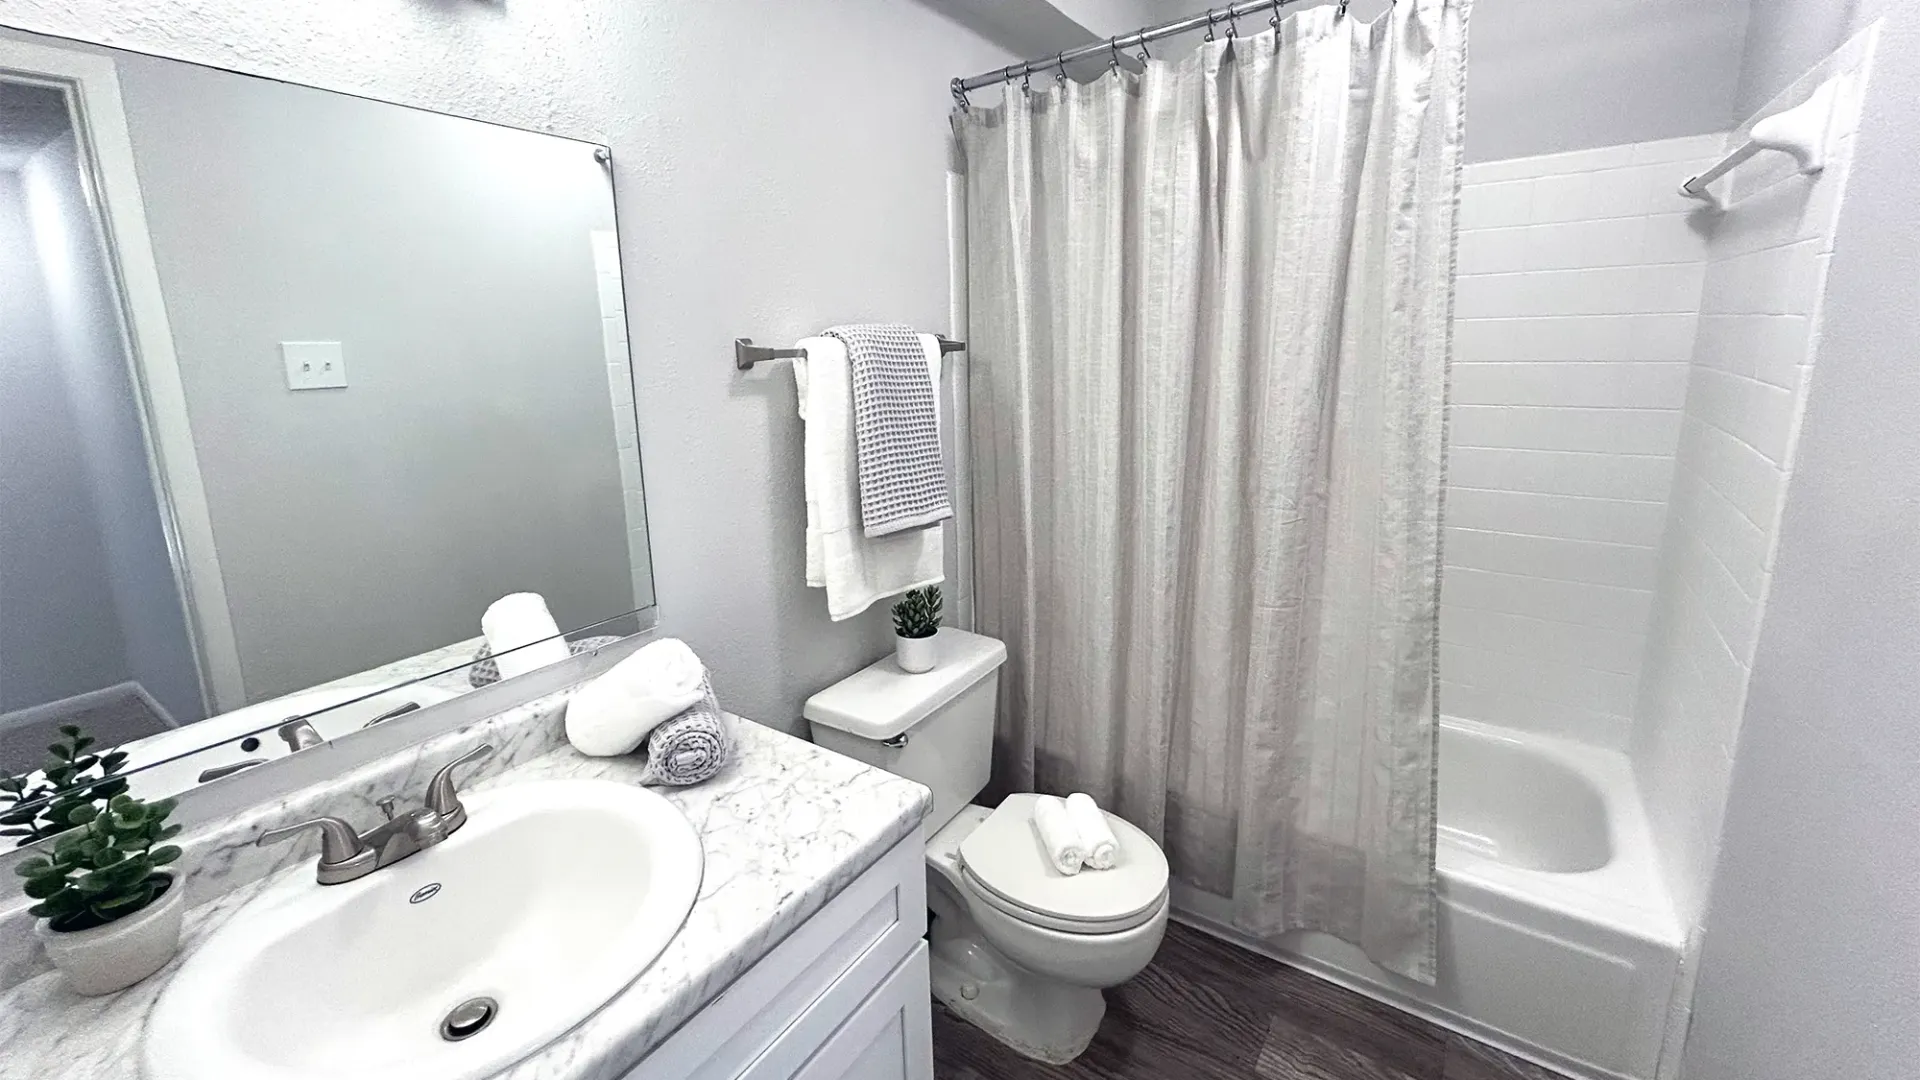 A bathroom with upgraded features, garden tub, and huge mirror